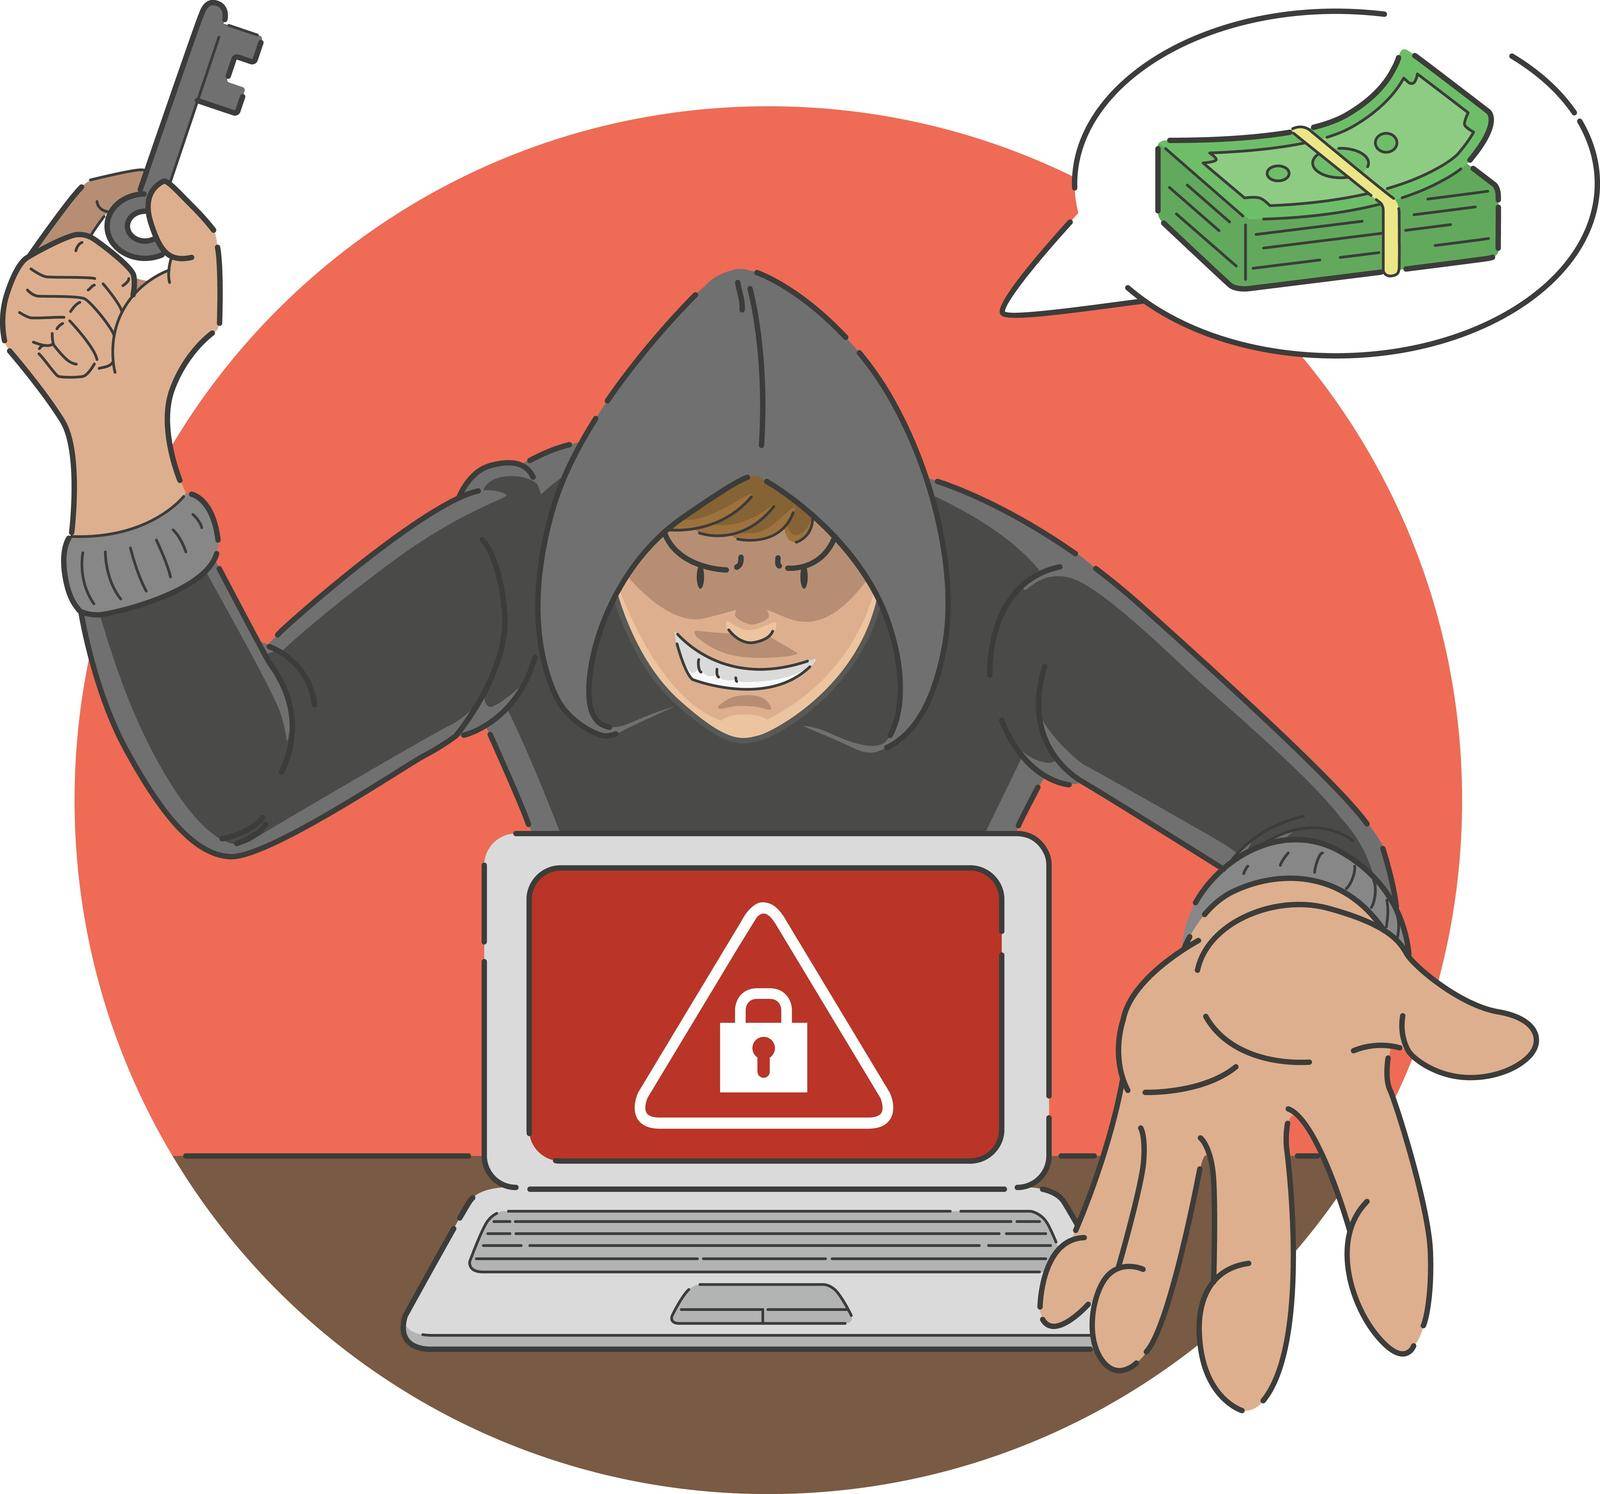 Ransomware Attack Scam Malware on Laptop Computer Cartoon Illustration by BluezAce